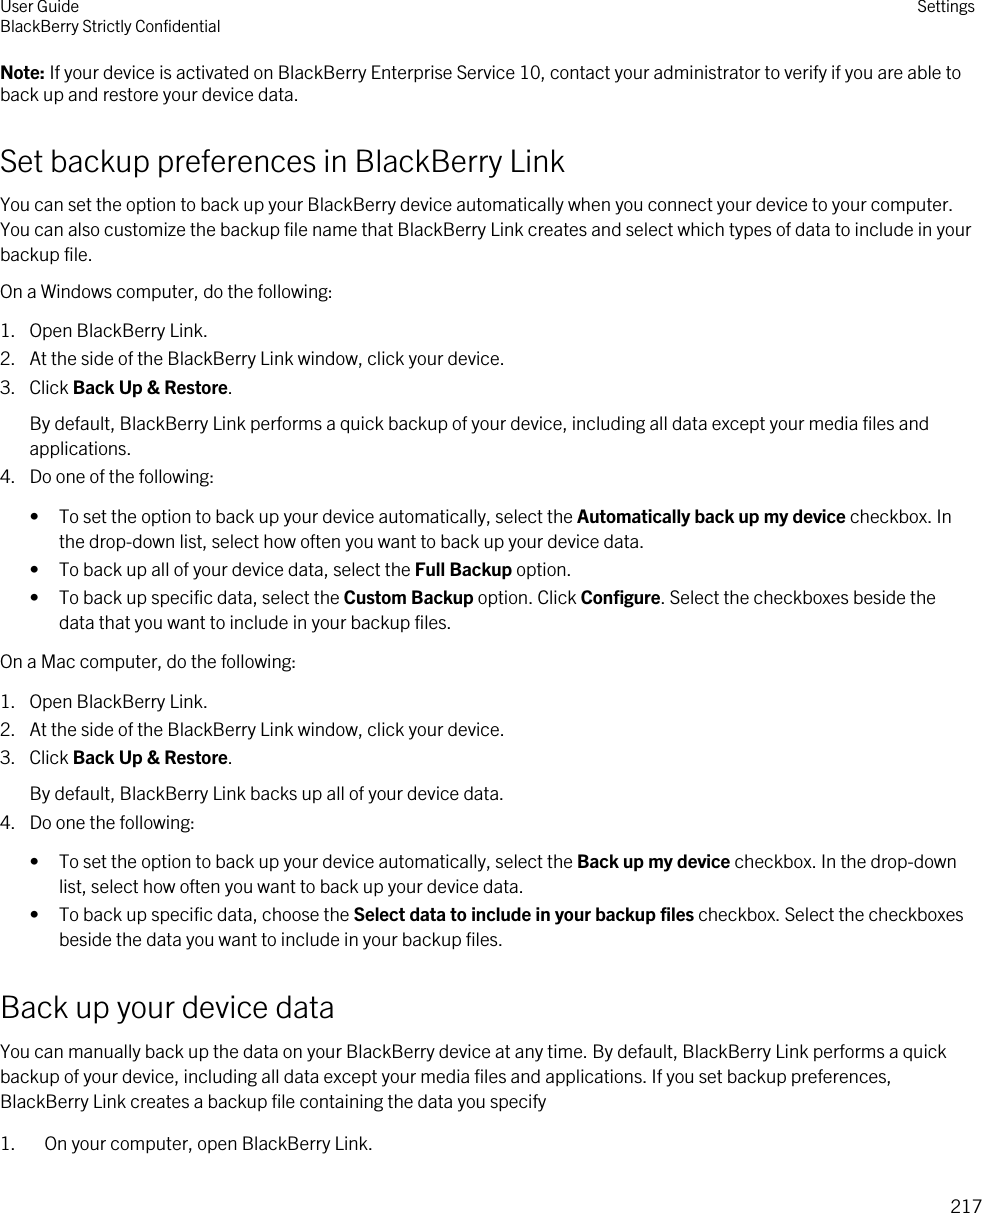 Note: If your device is activated on BlackBerry Enterprise Service 10, contact your administrator to verify if you are able to back up and restore your device data.Set backup preferences in BlackBerry LinkYou can set the option to back up your BlackBerry device automatically when you connect your device to your computer. You can also customize the backup file name that BlackBerry Link creates and select which types of data to include in your backup file.On a Windows computer, do the following:1. Open BlackBerry Link.2. At the side of the BlackBerry Link window, click your device.3. Click Back Up &amp; Restore.By default, BlackBerry Link performs a quick backup of your device, including all data except your media files and applications.4. Do one of the following:• To set the option to back up your device automatically, select the Automatically back up my device checkbox. In the drop-down list, select how often you want to back up your device data.• To back up all of your device data, select the Full Backup option.• To back up specific data, select the Custom Backup option. Click Configure. Select the checkboxes beside the data that you want to include in your backup files.On a Mac computer, do the following:1. Open BlackBerry Link.2. At the side of the BlackBerry Link window, click your device.3. Click Back Up &amp; Restore.By default, BlackBerry Link backs up all of your device data.4. Do one the following:• To set the option to back up your device automatically, select the Back up my device checkbox. In the drop-down list, select how often you want to back up your device data.• To back up specific data, choose the Select data to include in your backup files checkbox. Select the checkboxes beside the data you want to include in your backup files.Back up your device dataYou can manually back up the data on your BlackBerry device at any time. By default, BlackBerry Link performs a quick backup of your device, including all data except your media files and applications. If you set backup preferences, BlackBerry Link creates a backup file containing the data you specify1. On your computer, open BlackBerry Link.User GuideBlackBerry Strictly Confidential Settings217